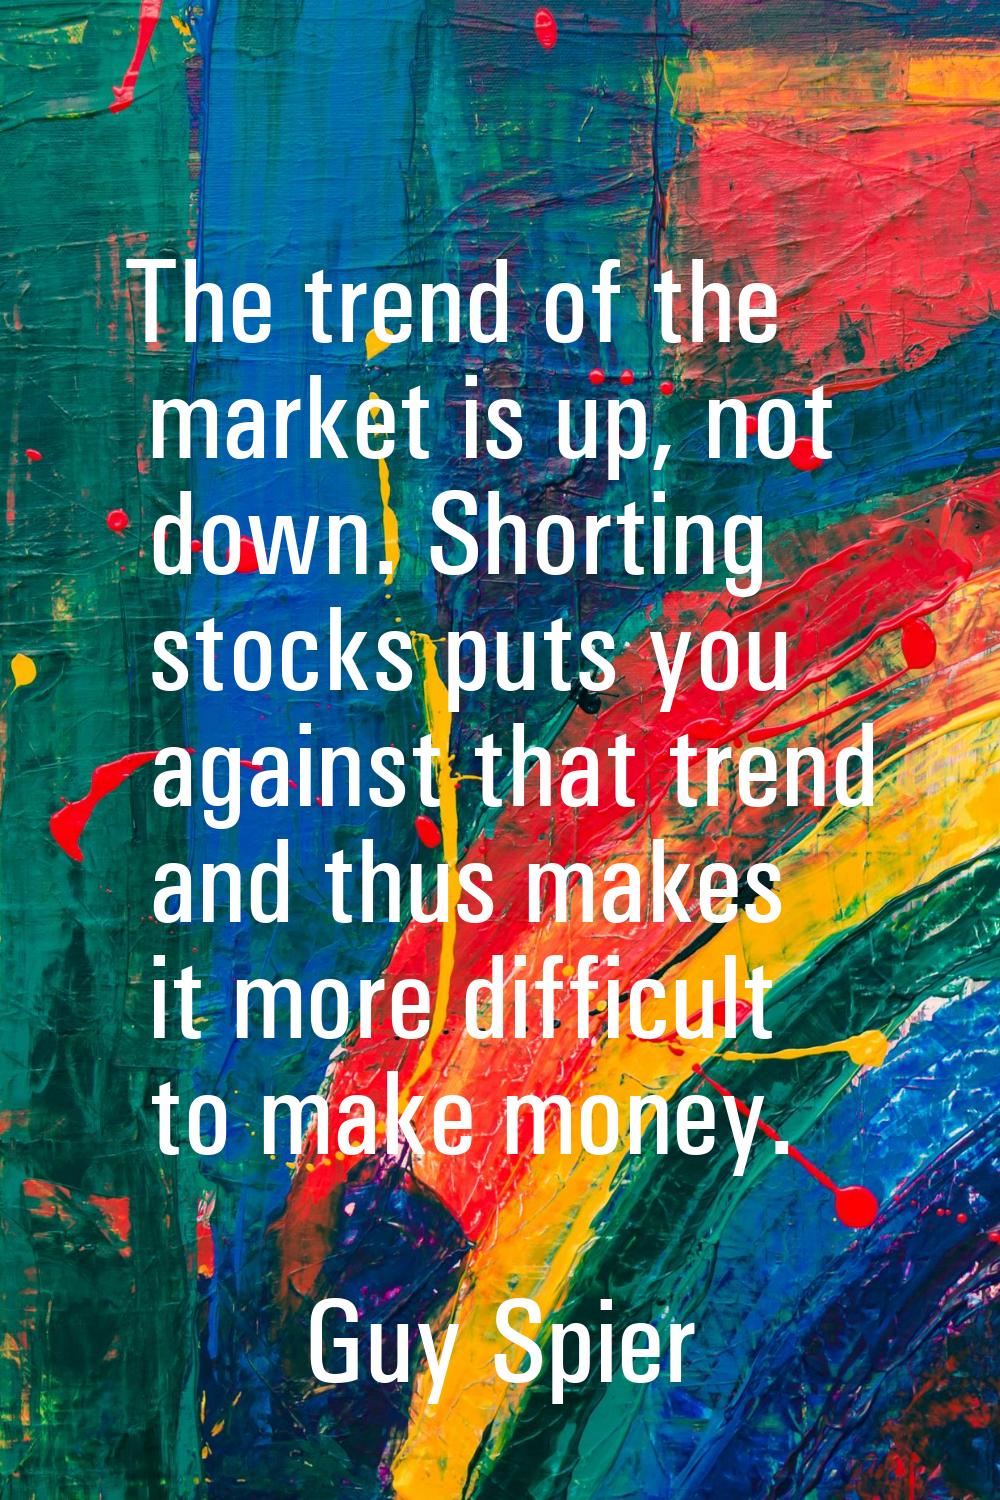 The trend of the market is up, not down. Shorting stocks puts you against that trend and thus makes